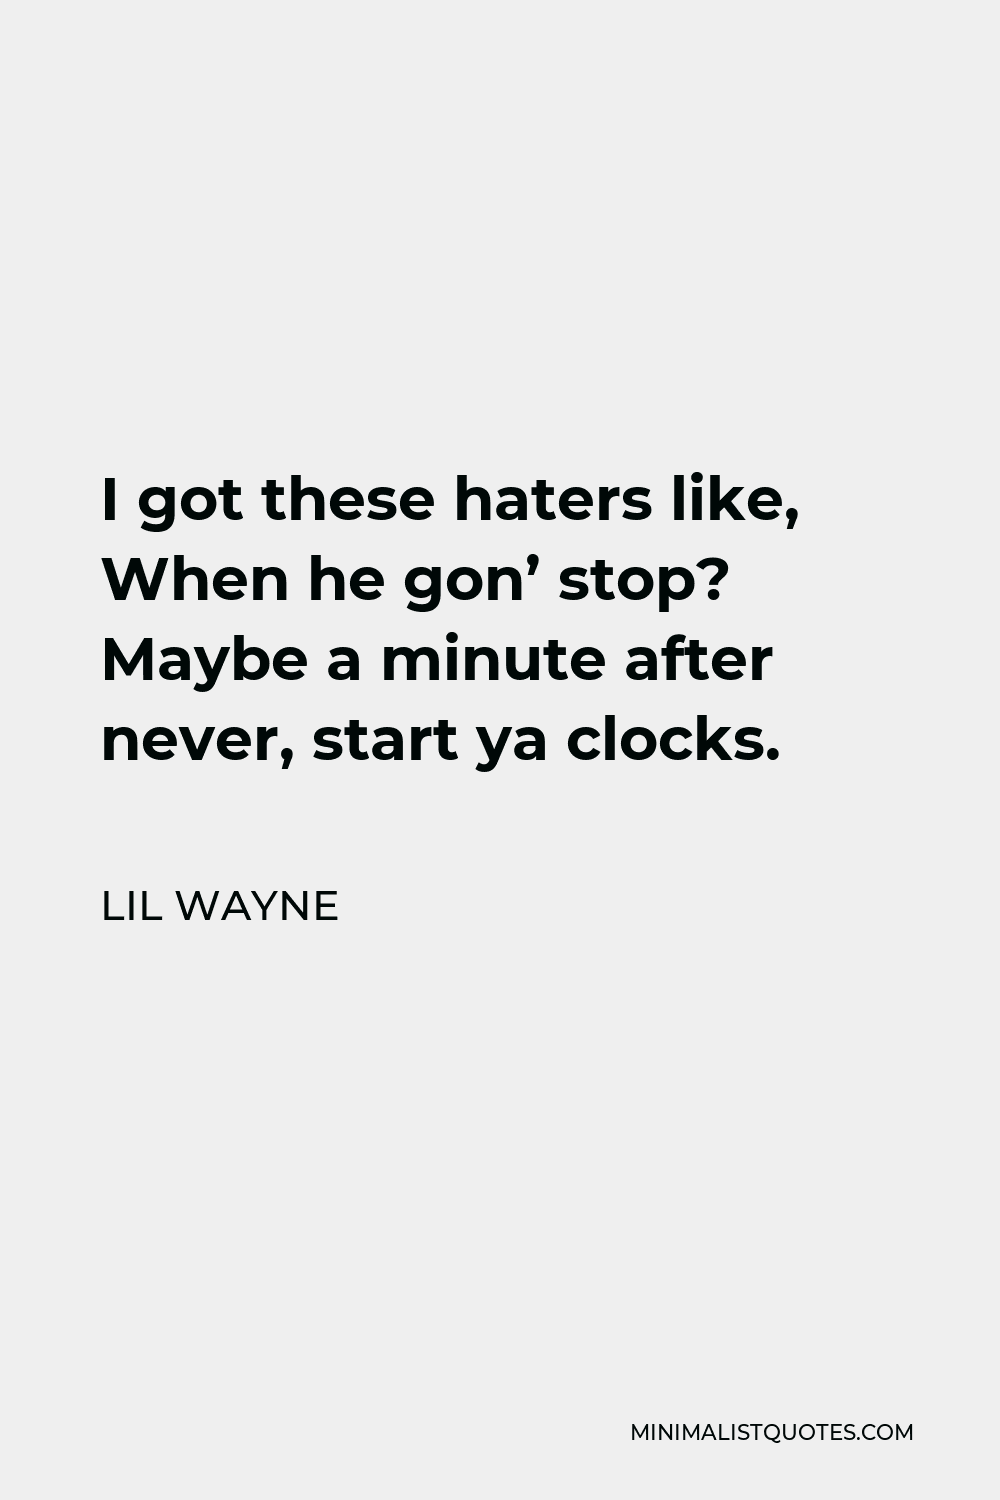 Lil Wayne Quote - I got these haters like, When he gon’ stop? Maybe a minute after never, start ya clocks.